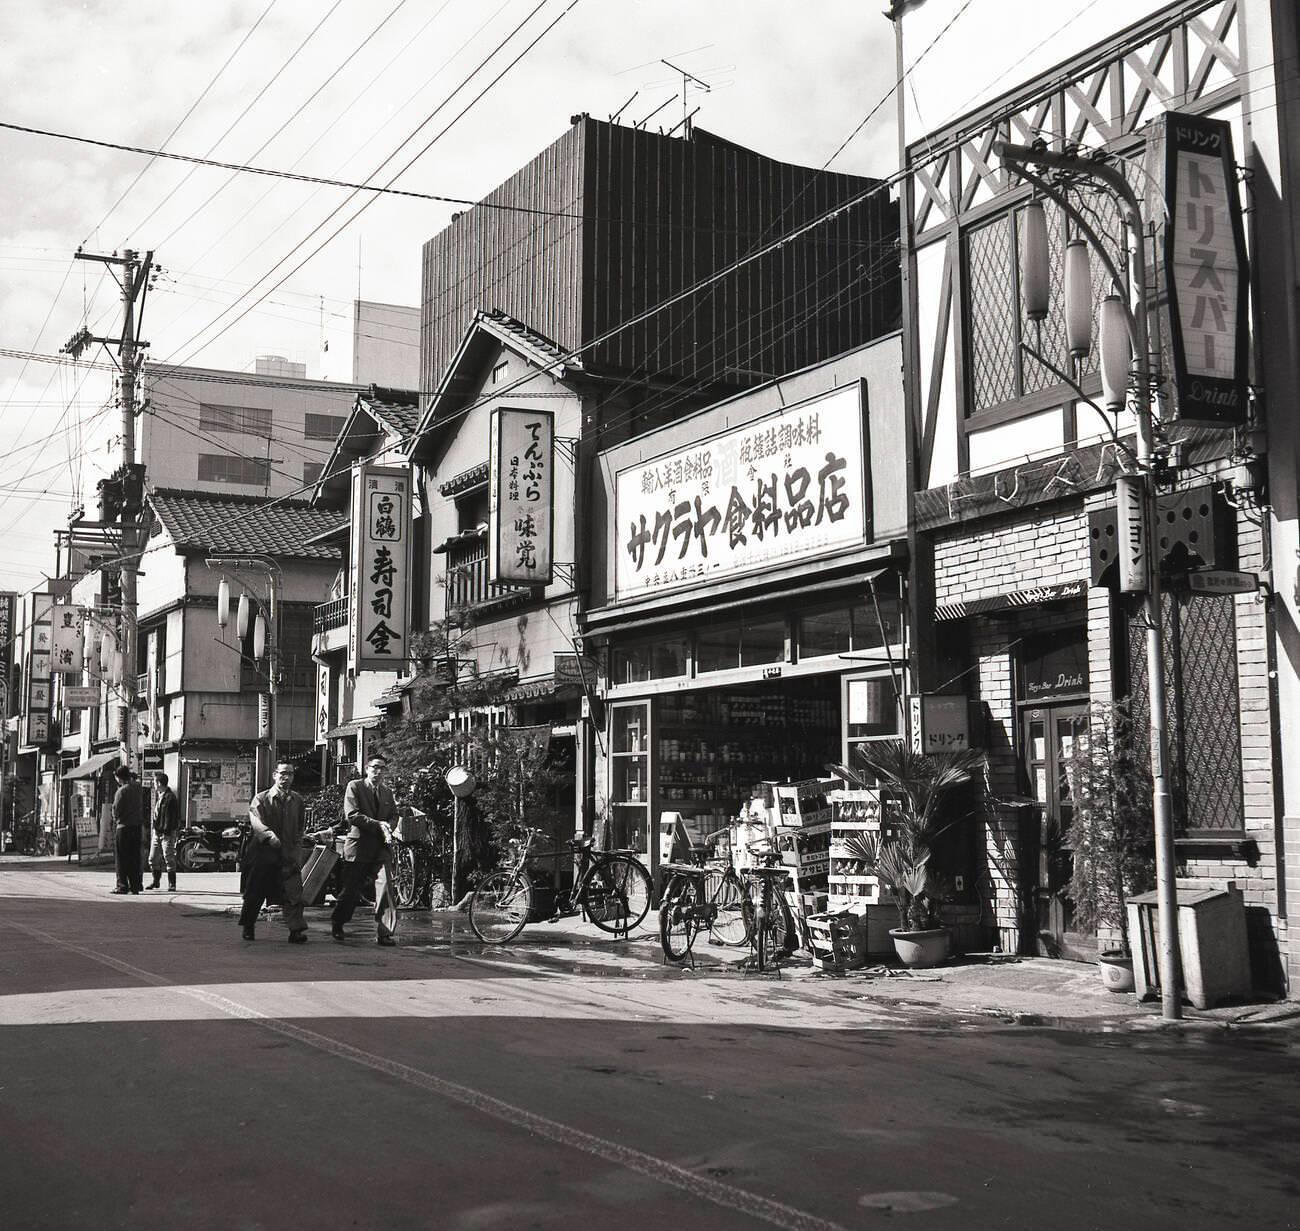 A retail food store in the old town of Tokyo, 1950s.